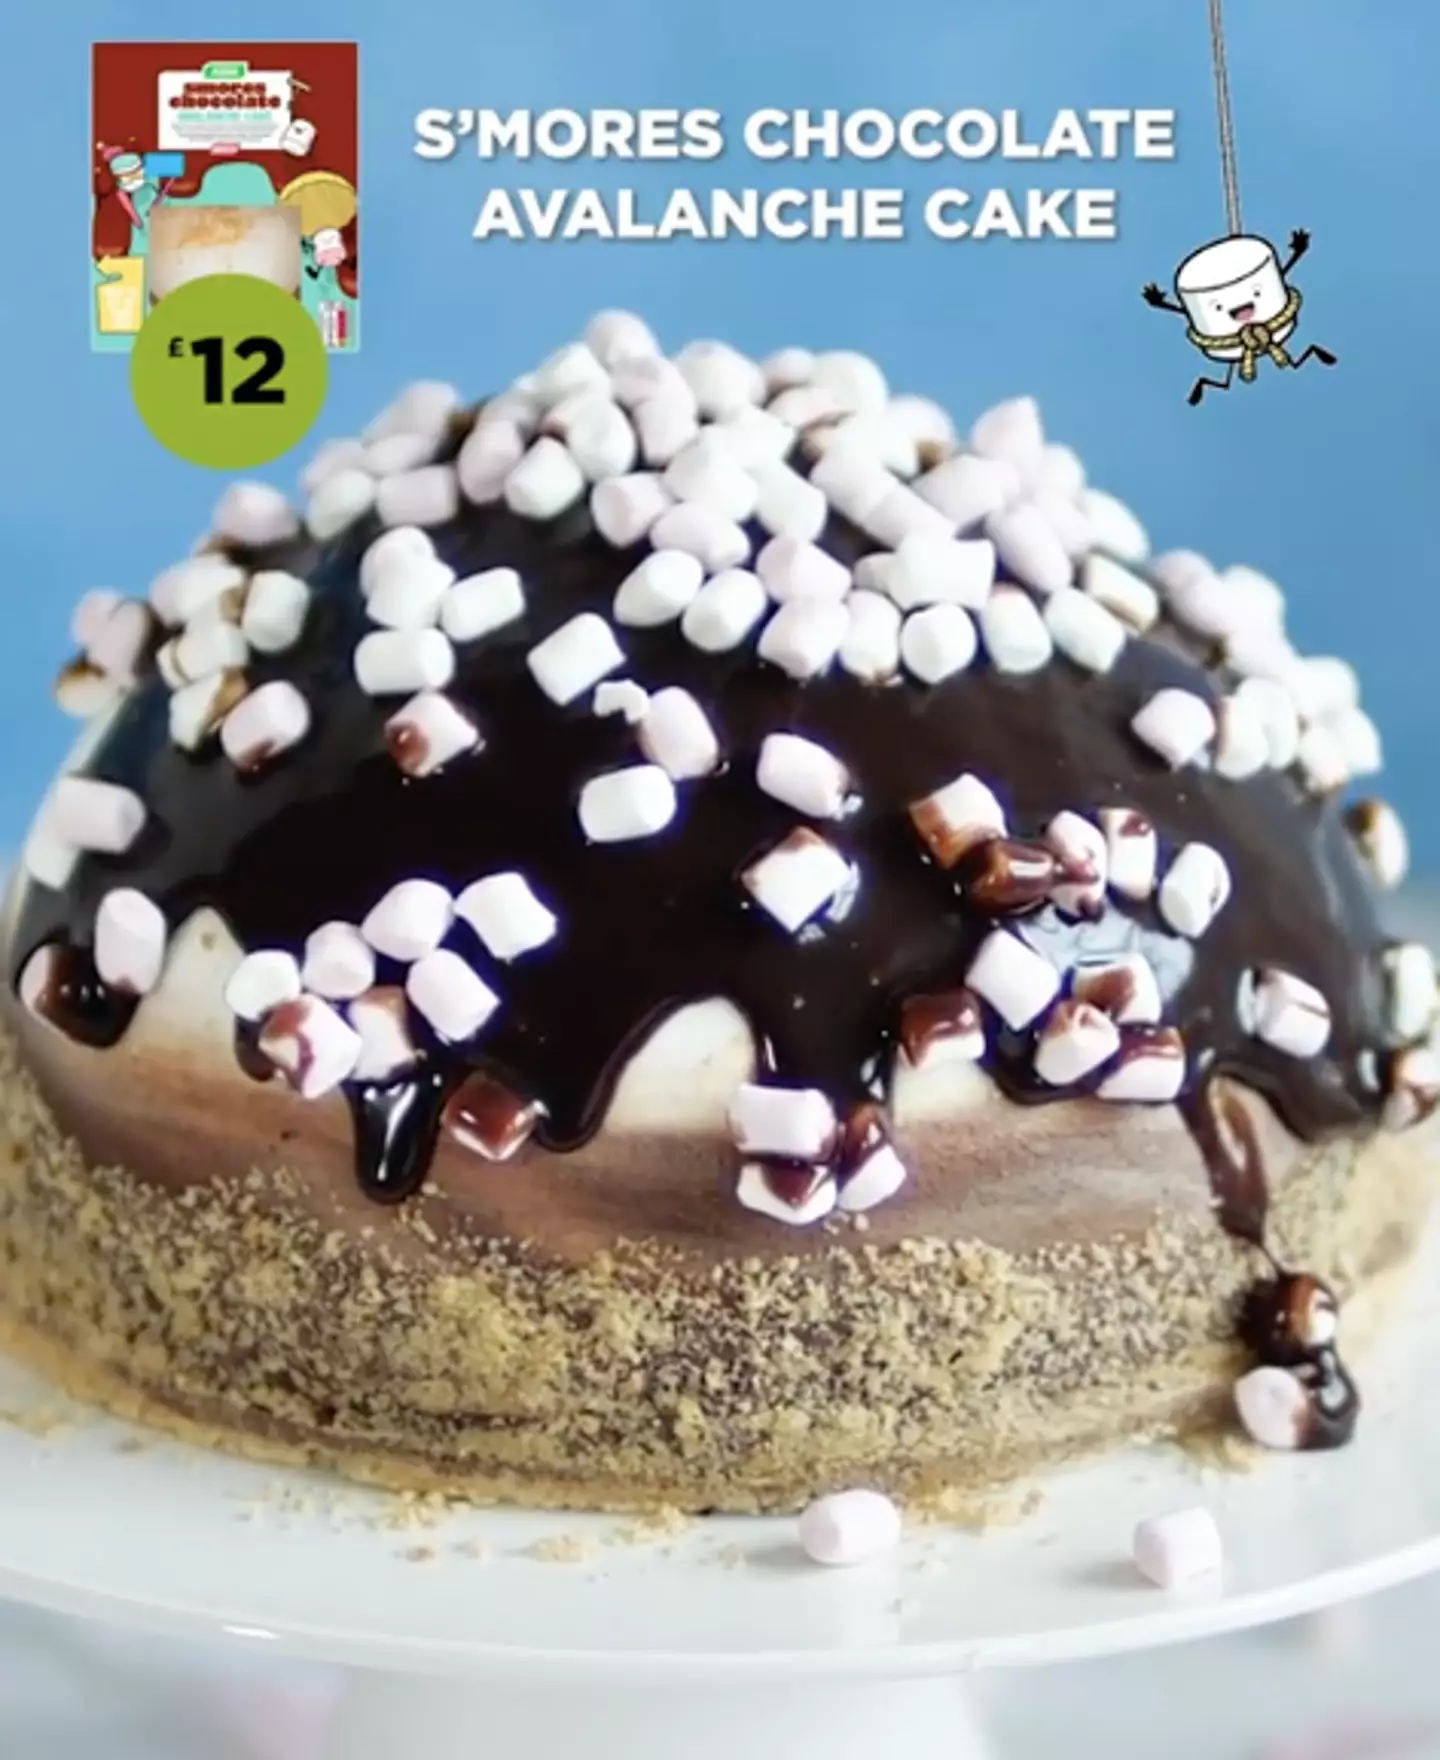 Asda teased the arrival of the gorgeous £12 S'Mores cake (